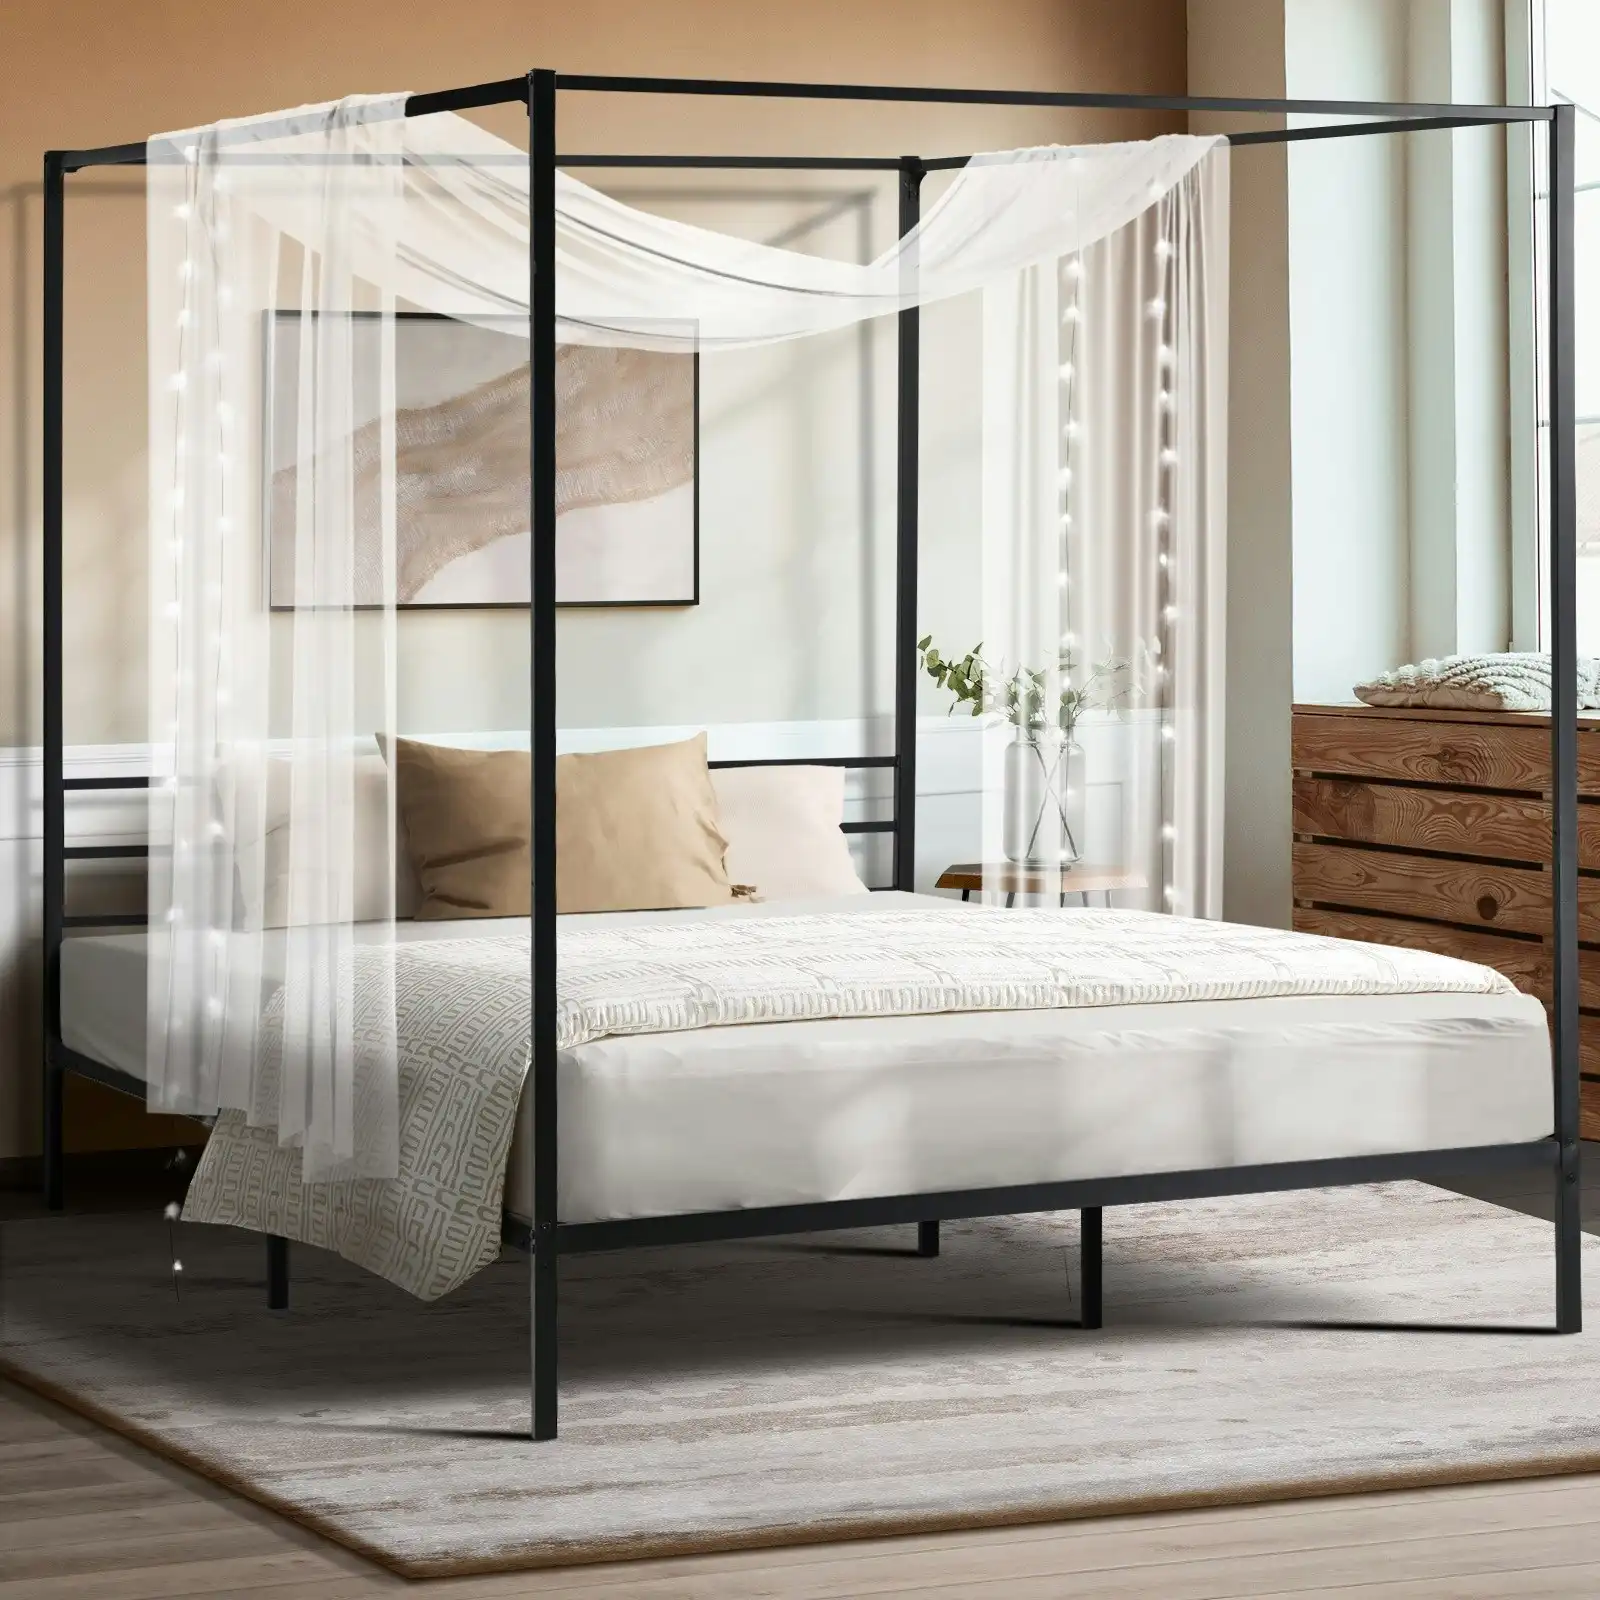 Oikiture Metal Canopy Bed Frame Queen Size Platform